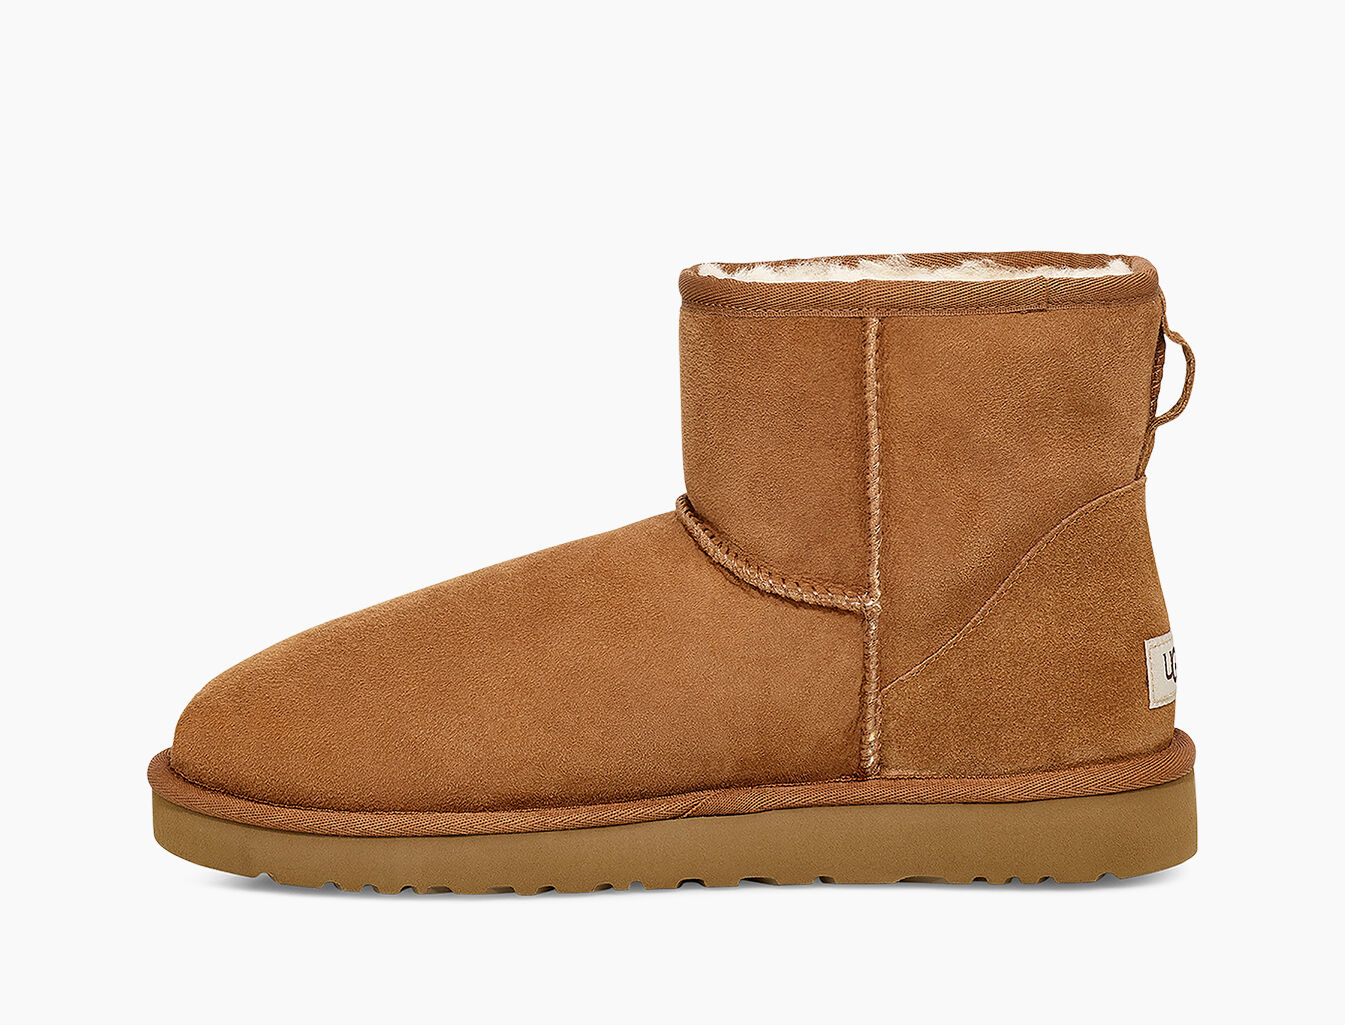 mens ugg boots with fur